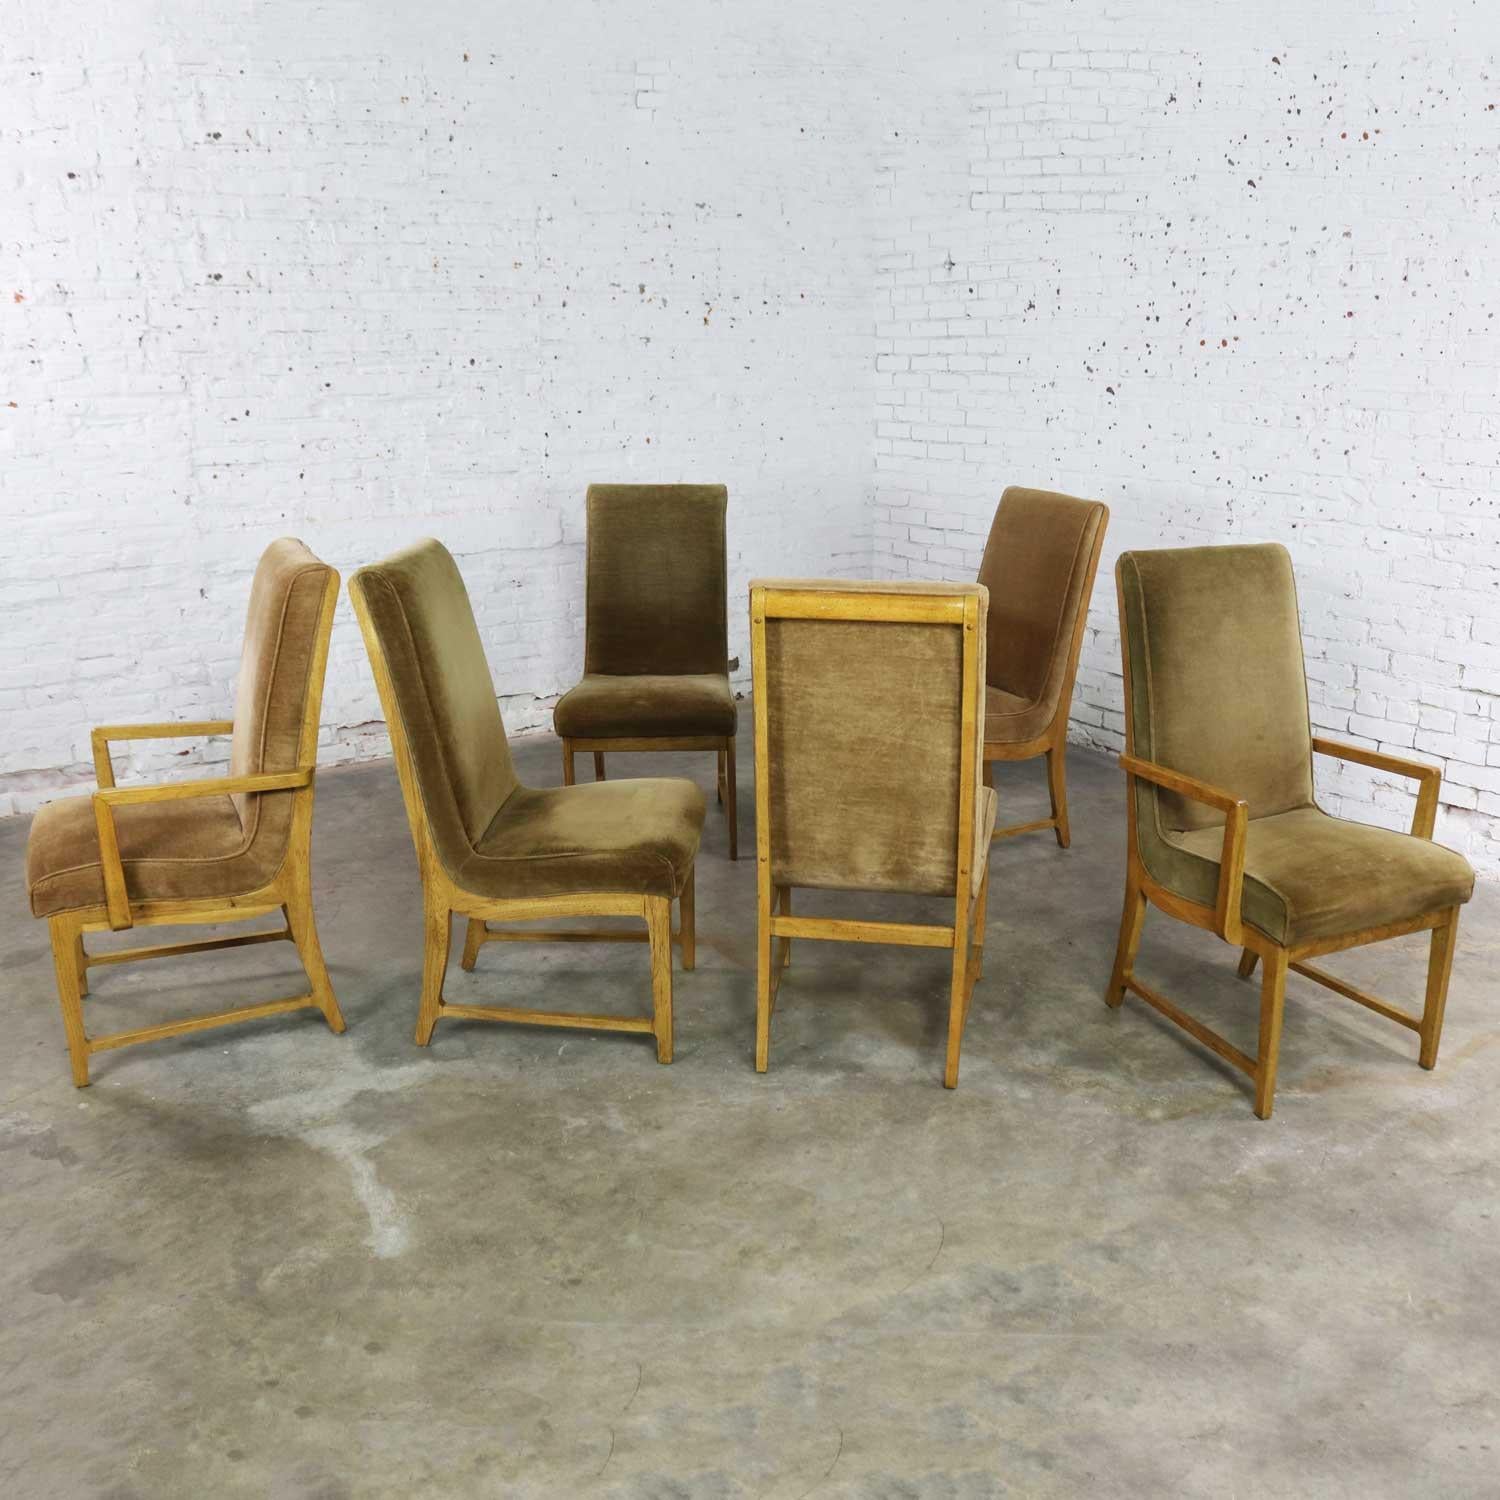 Awesome set of 6 vintage modern style scoop seat dining chairs in coffee-with-cream colored velvet by Flair for Hibriten. Flair was a division of Bernhardt Furniture. There are two armed host chairs and four armless side chairs. All are in wonderful